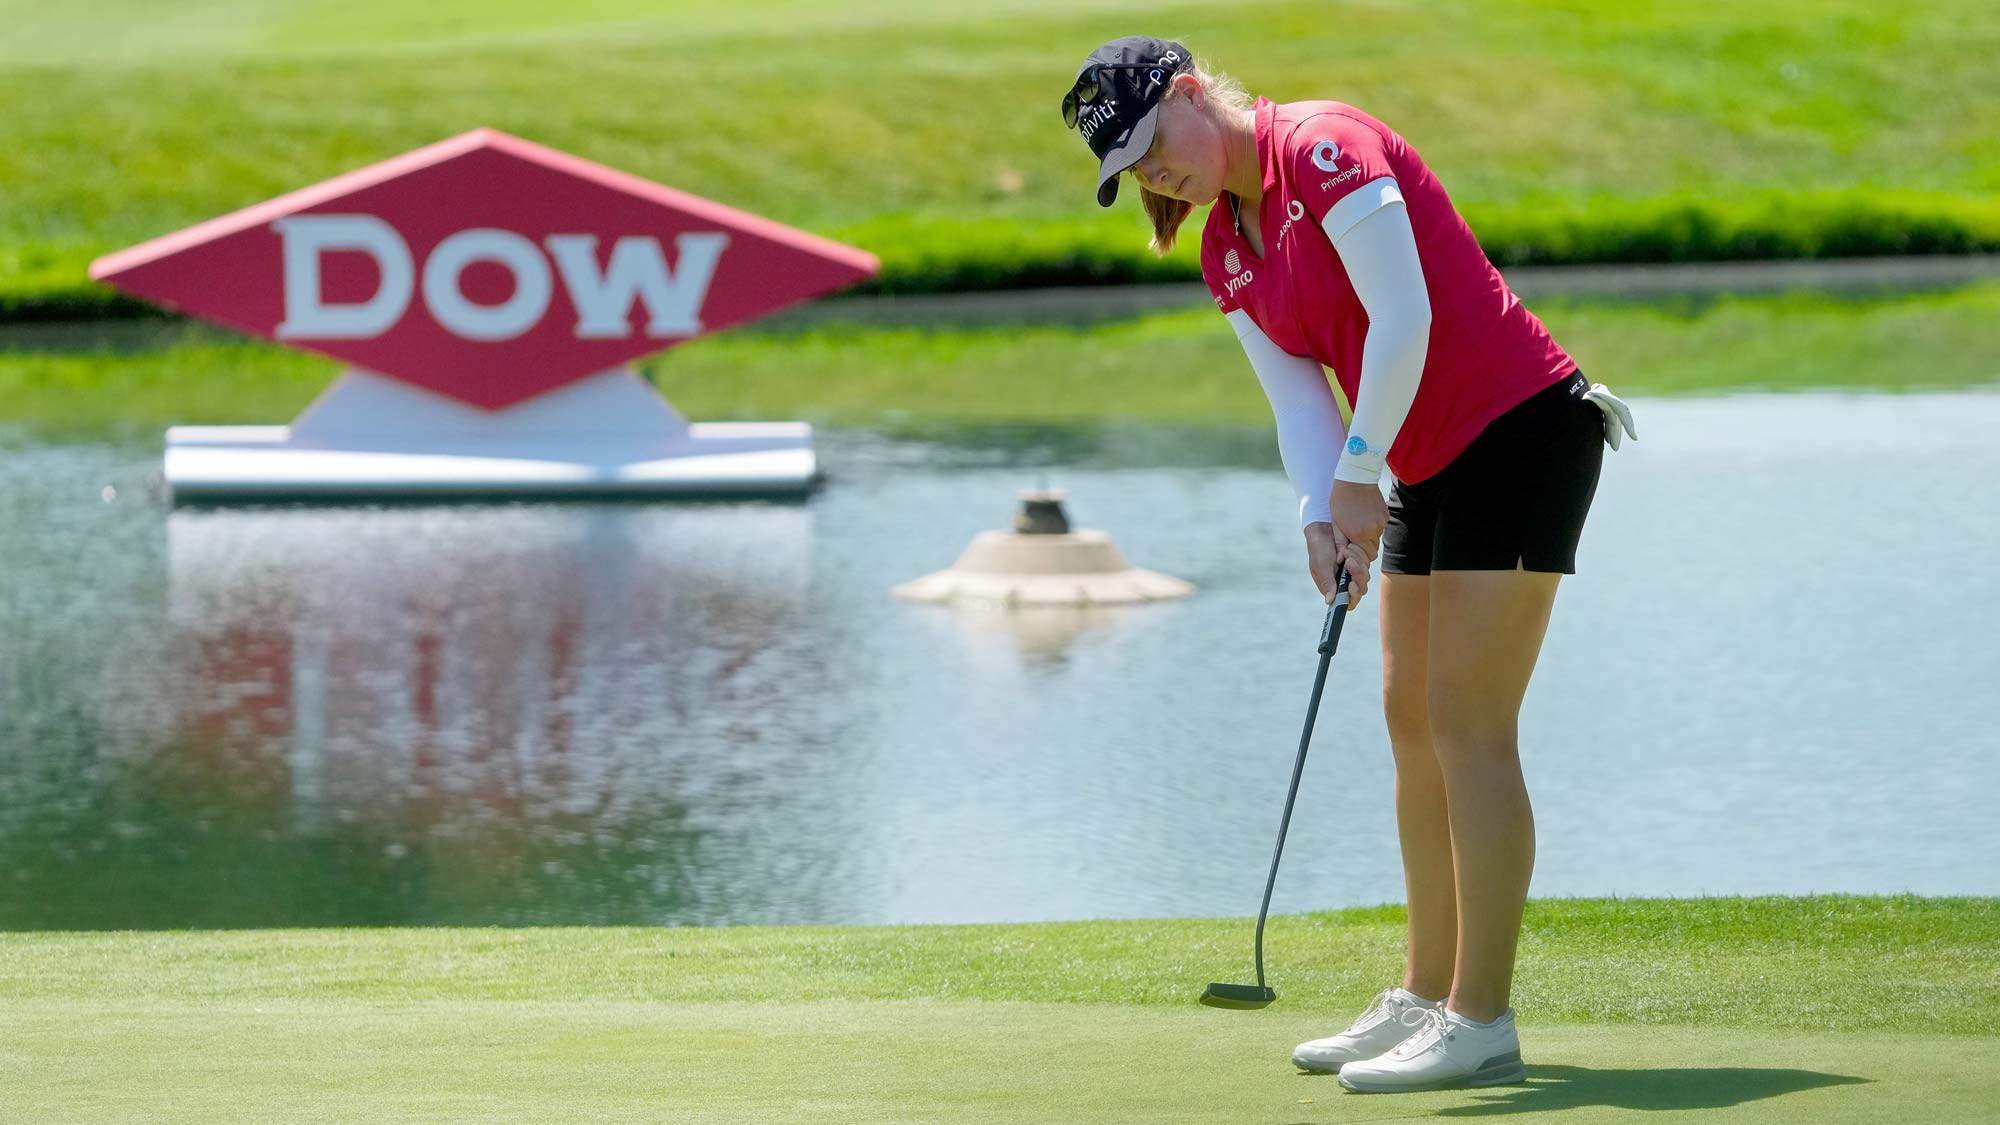 Jennifer Kupcho of the United States putts on the fifth green during the second round of the Dow Great Lakes Bay Invitational